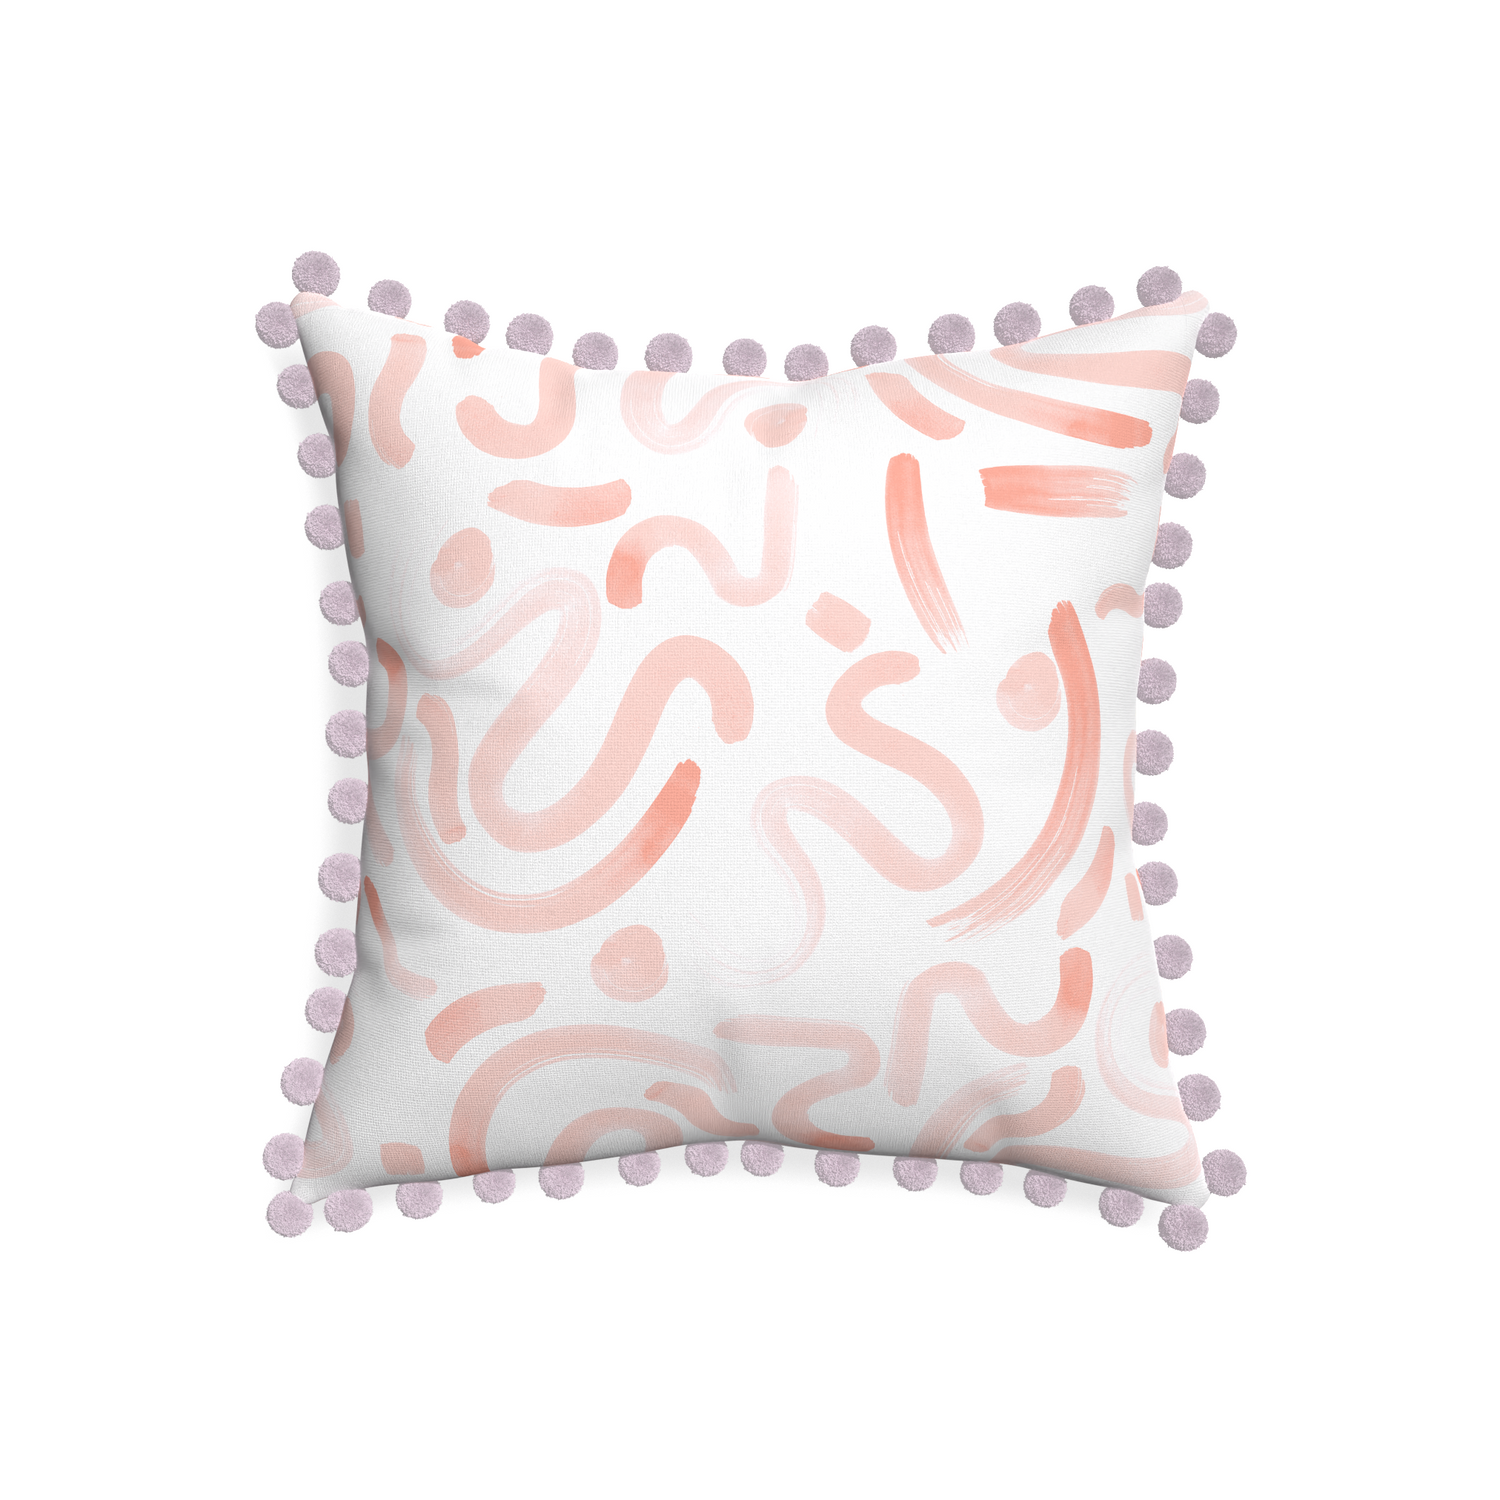 20-square hockney pink custom pillow with l on white background